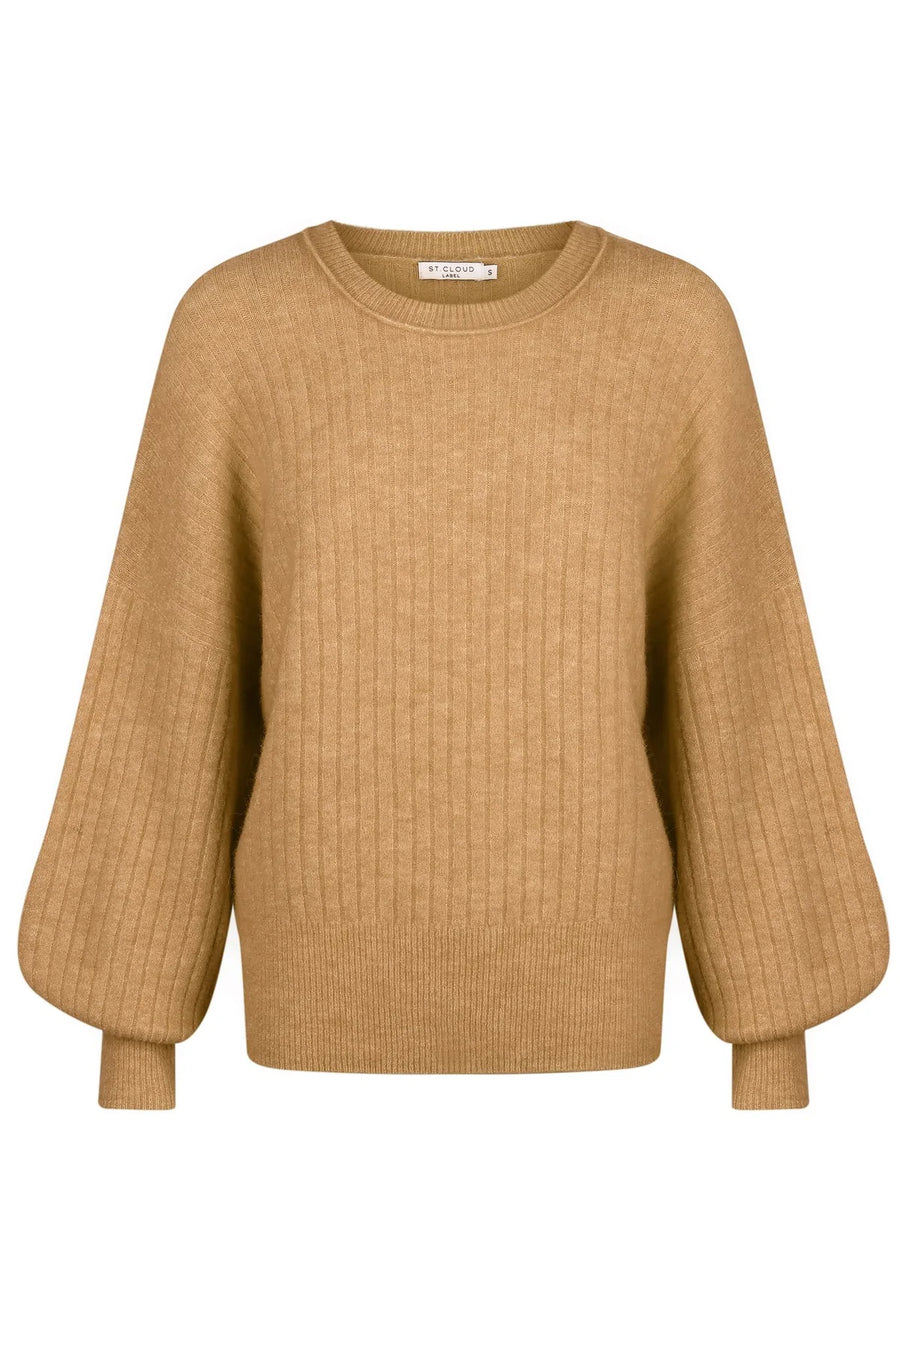 St. Cloud Ribbed Balloon Sleeve Crew Knit - FINAL SALE